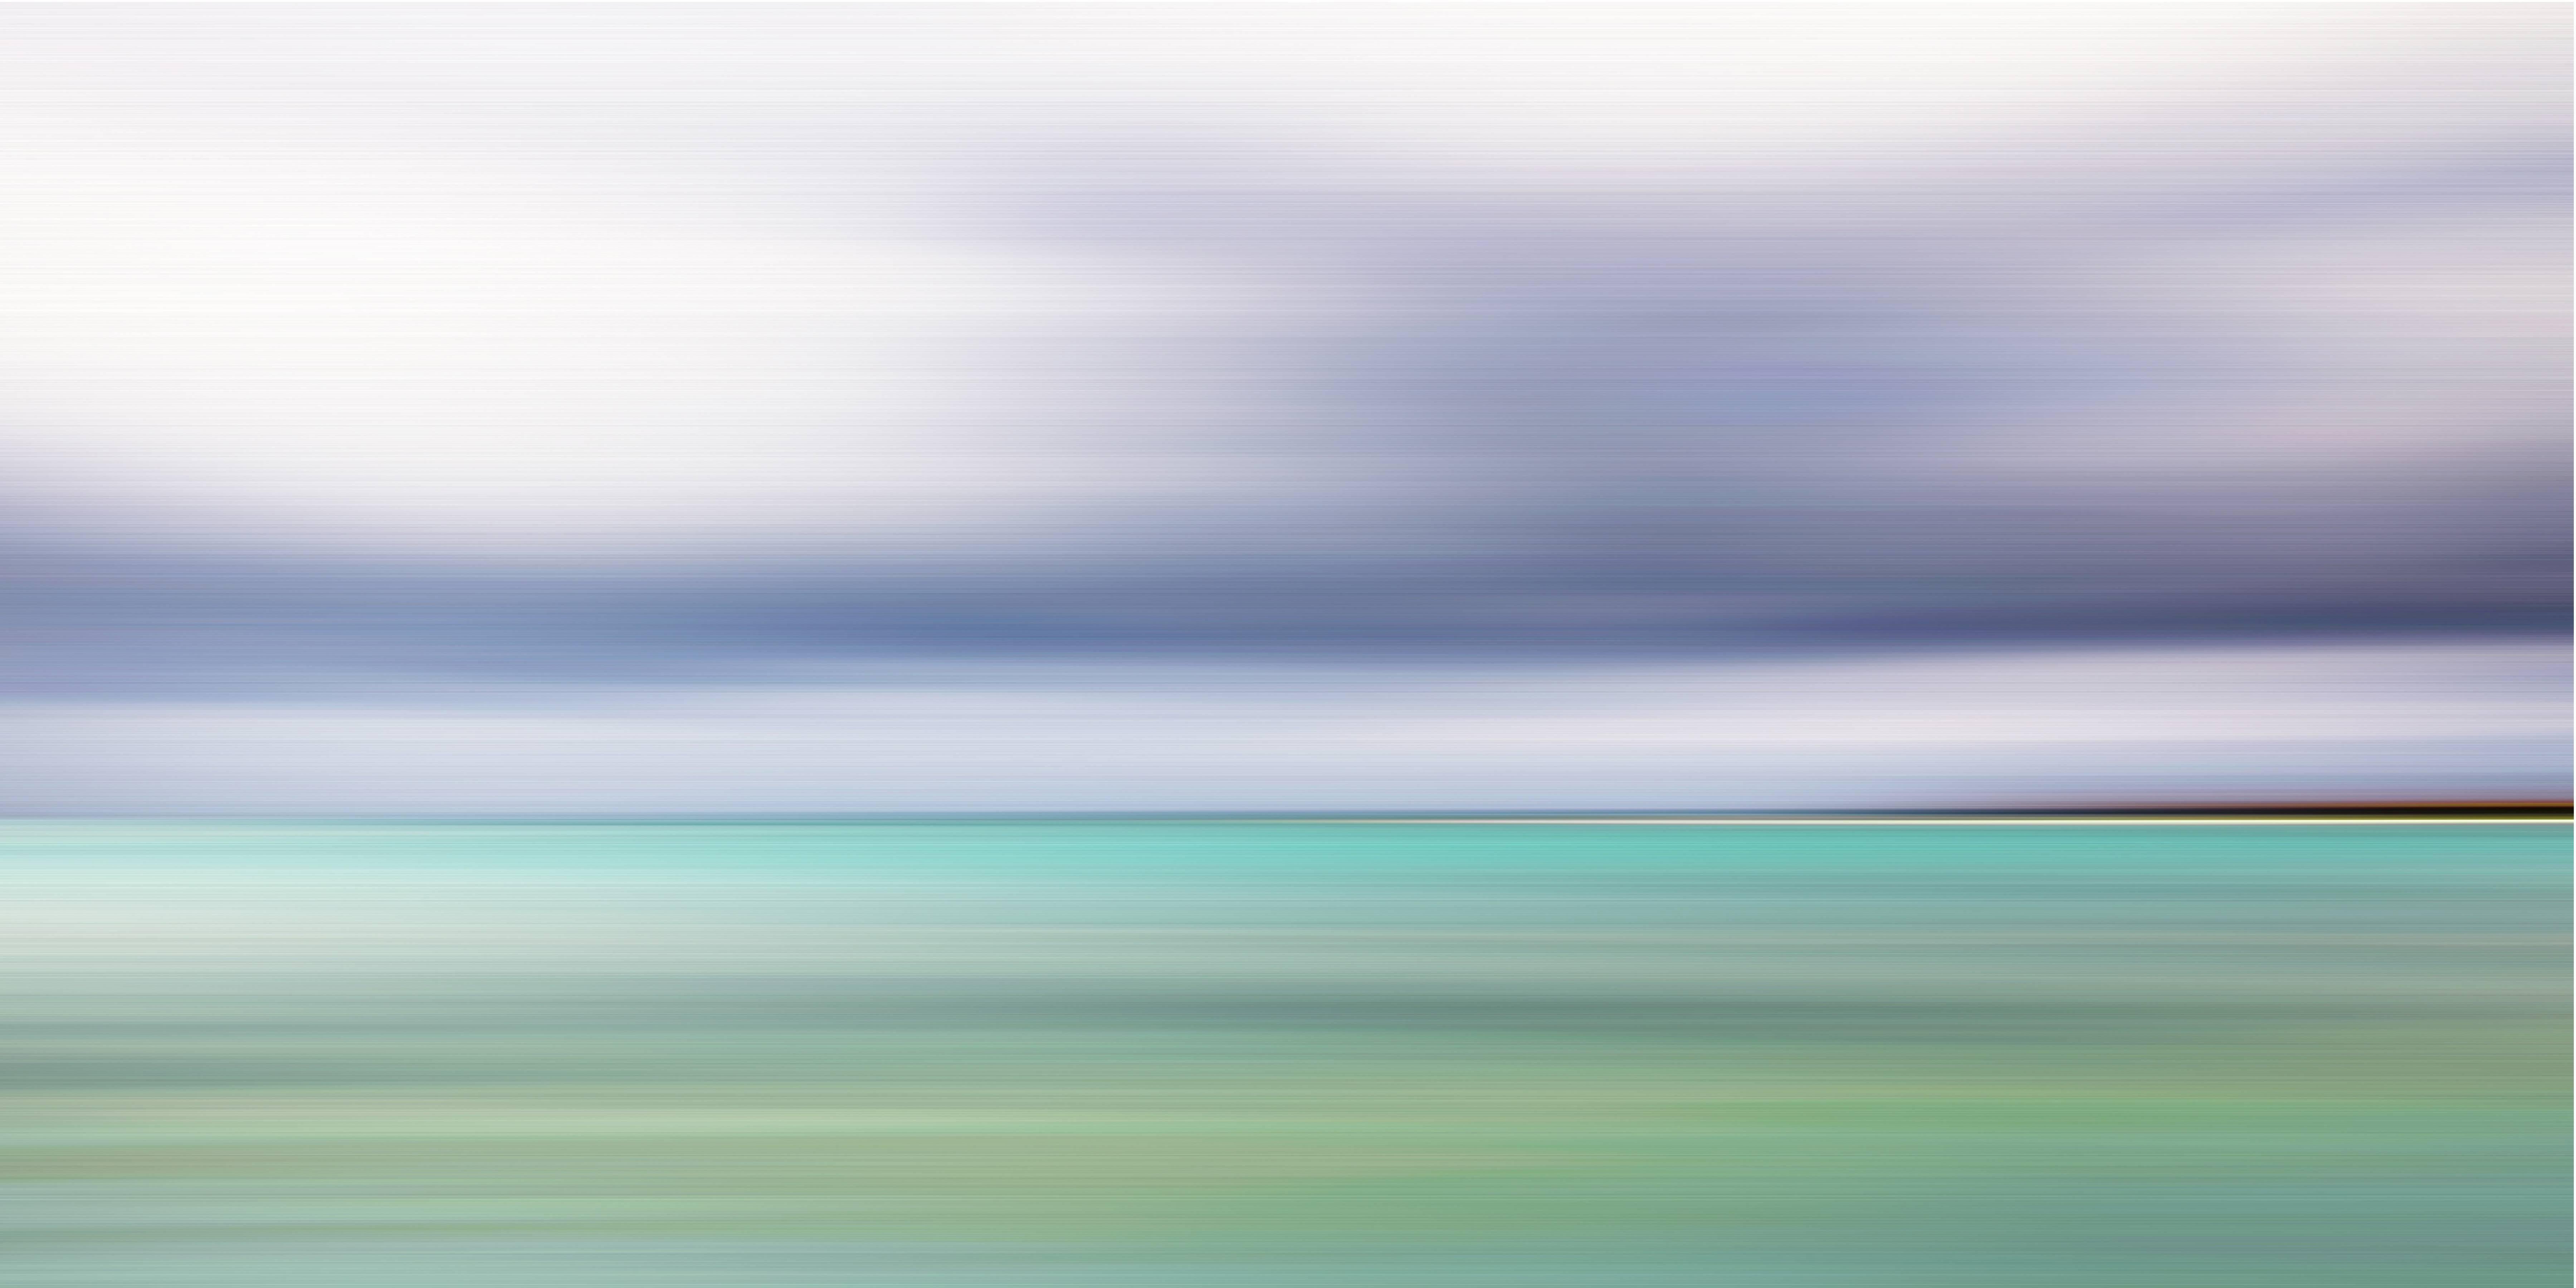 Etienne Labbe Abstract Photograph - Emerald Mood (V.2 of 3)